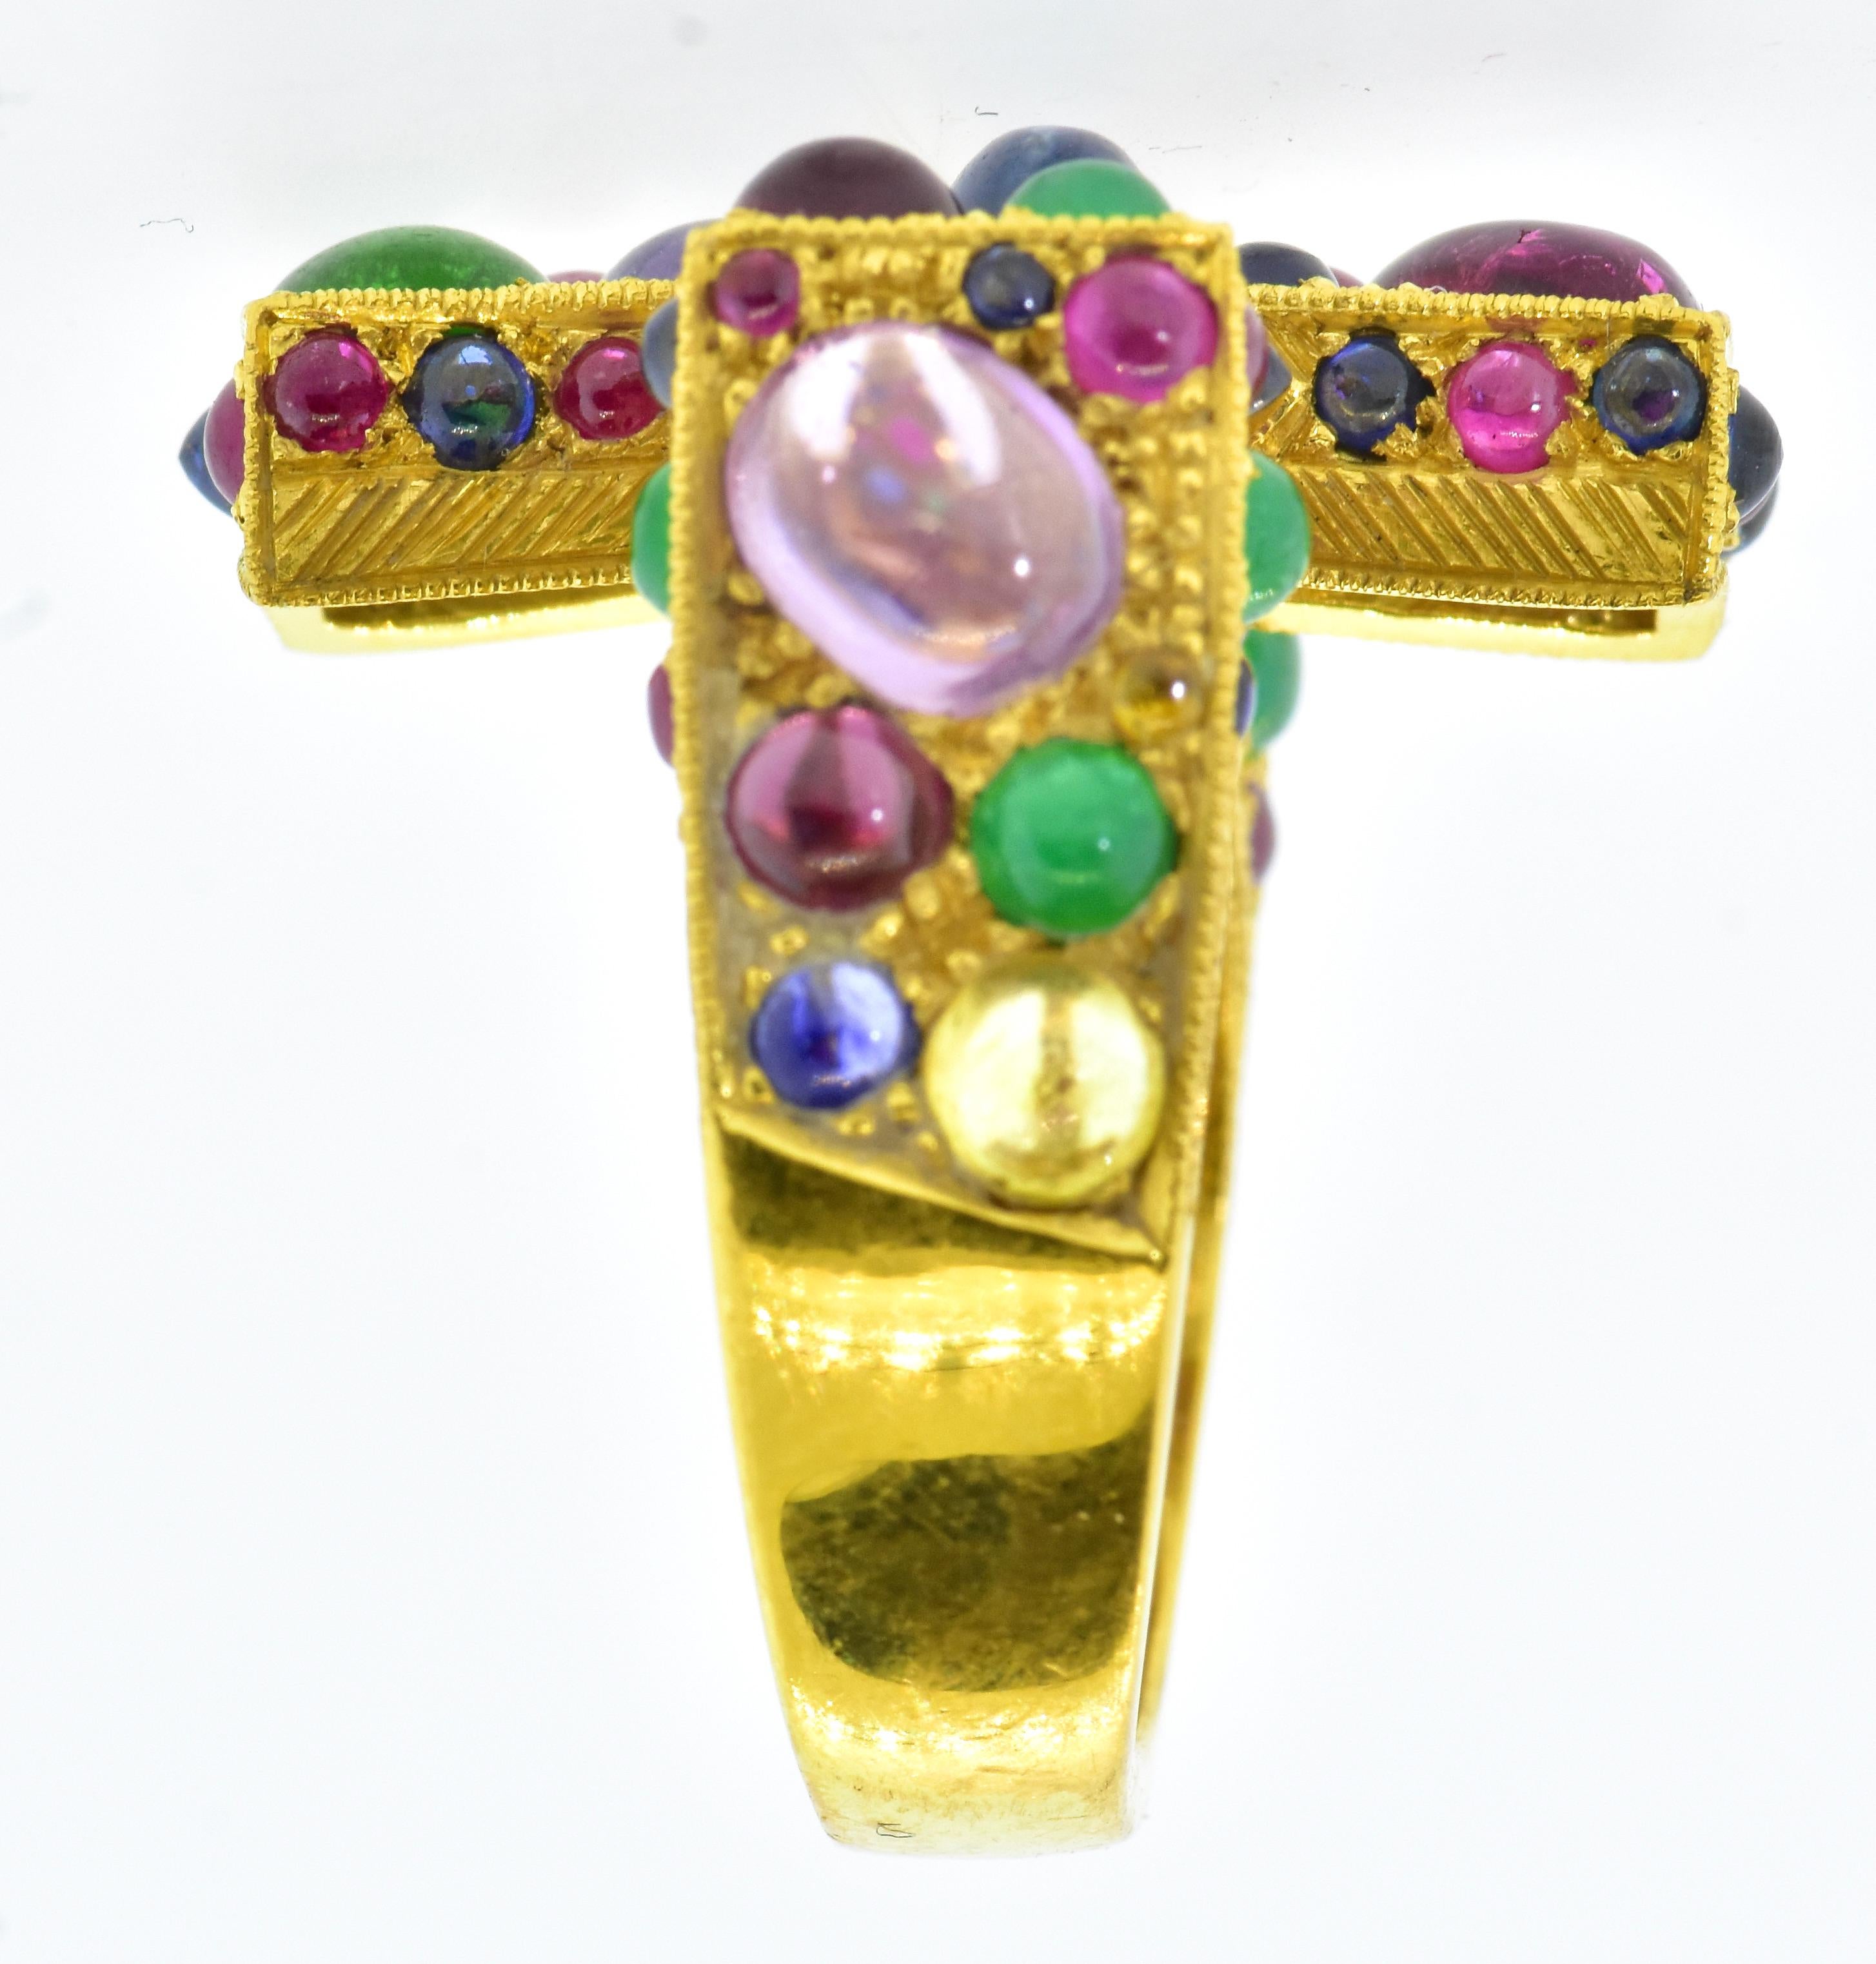 Cabochon Maltese Cross Ring Studded with Sapphires, Rubies and Emeralds, Fairchild & Co.